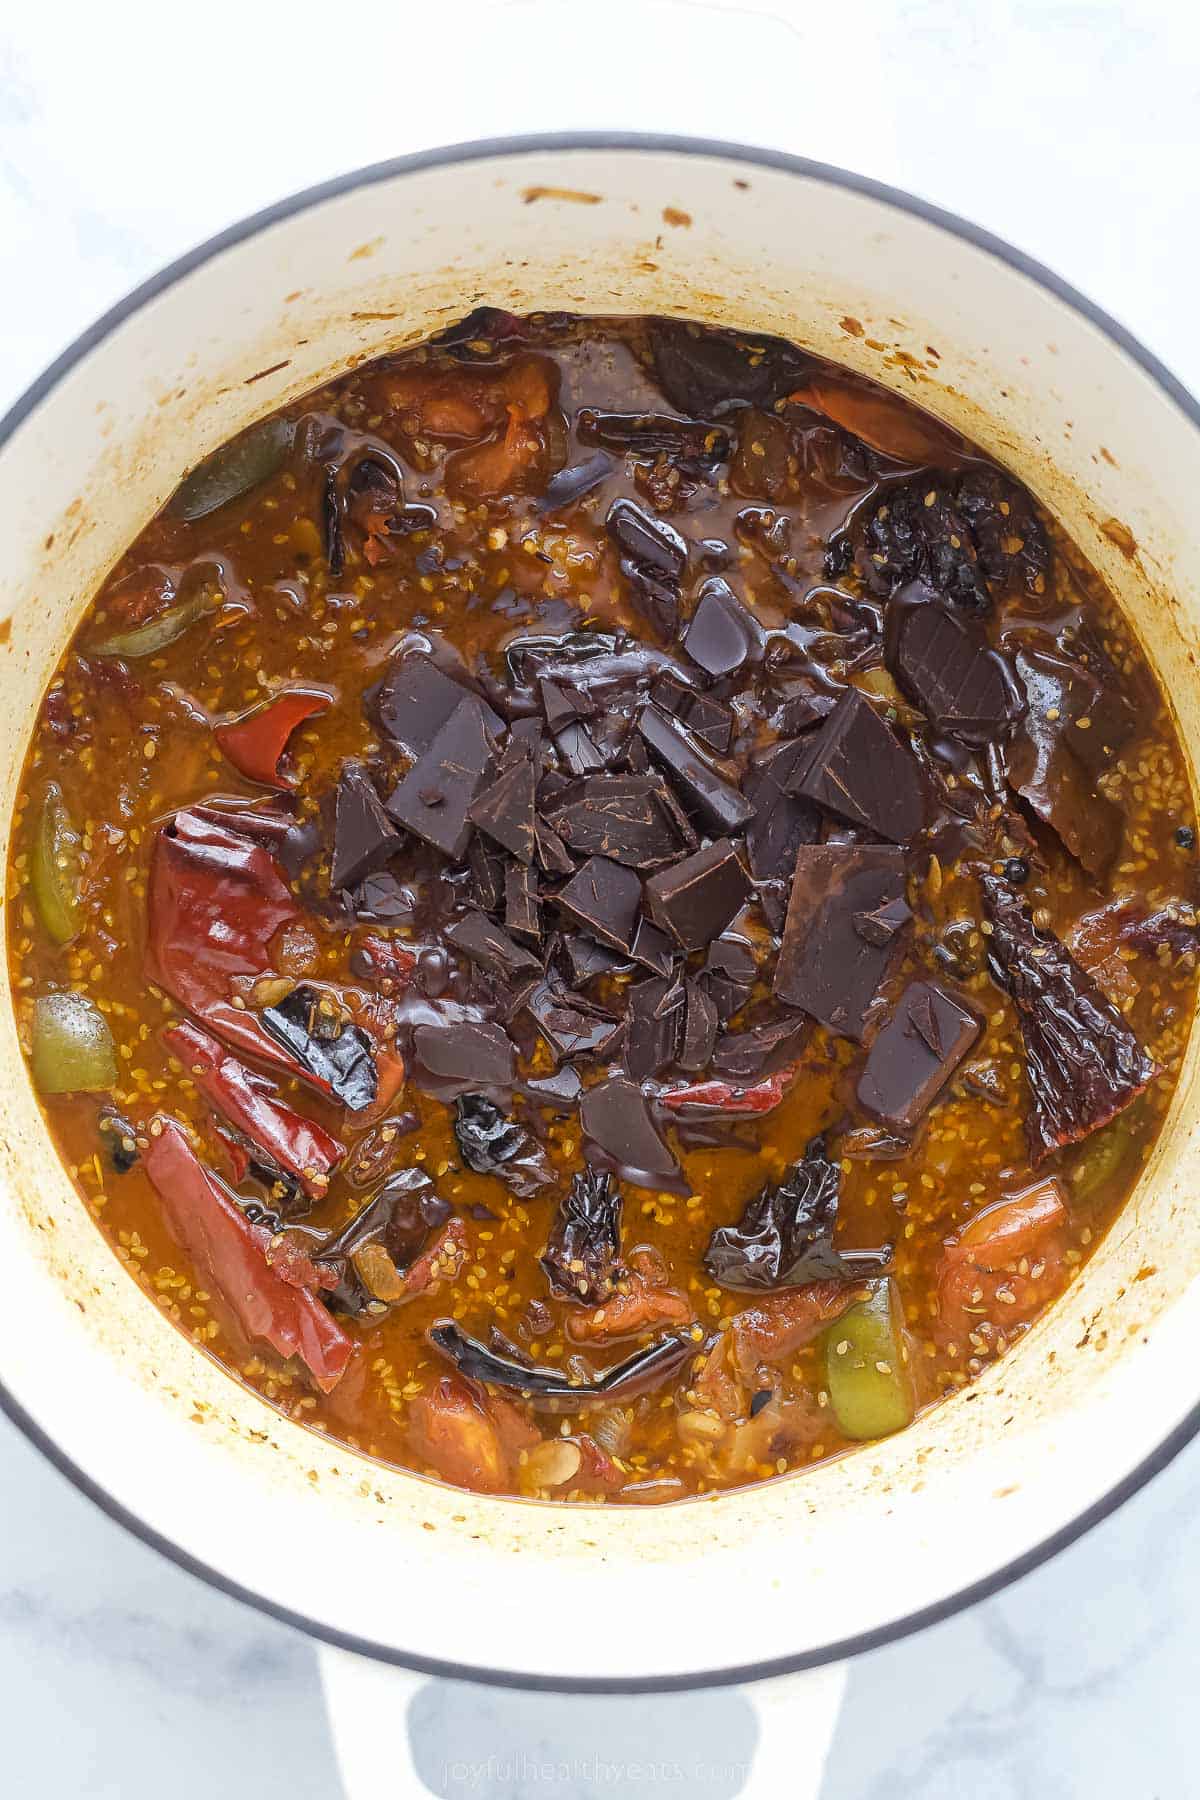 a dark colored base sauce with dried chilies, tomatoes, and spices